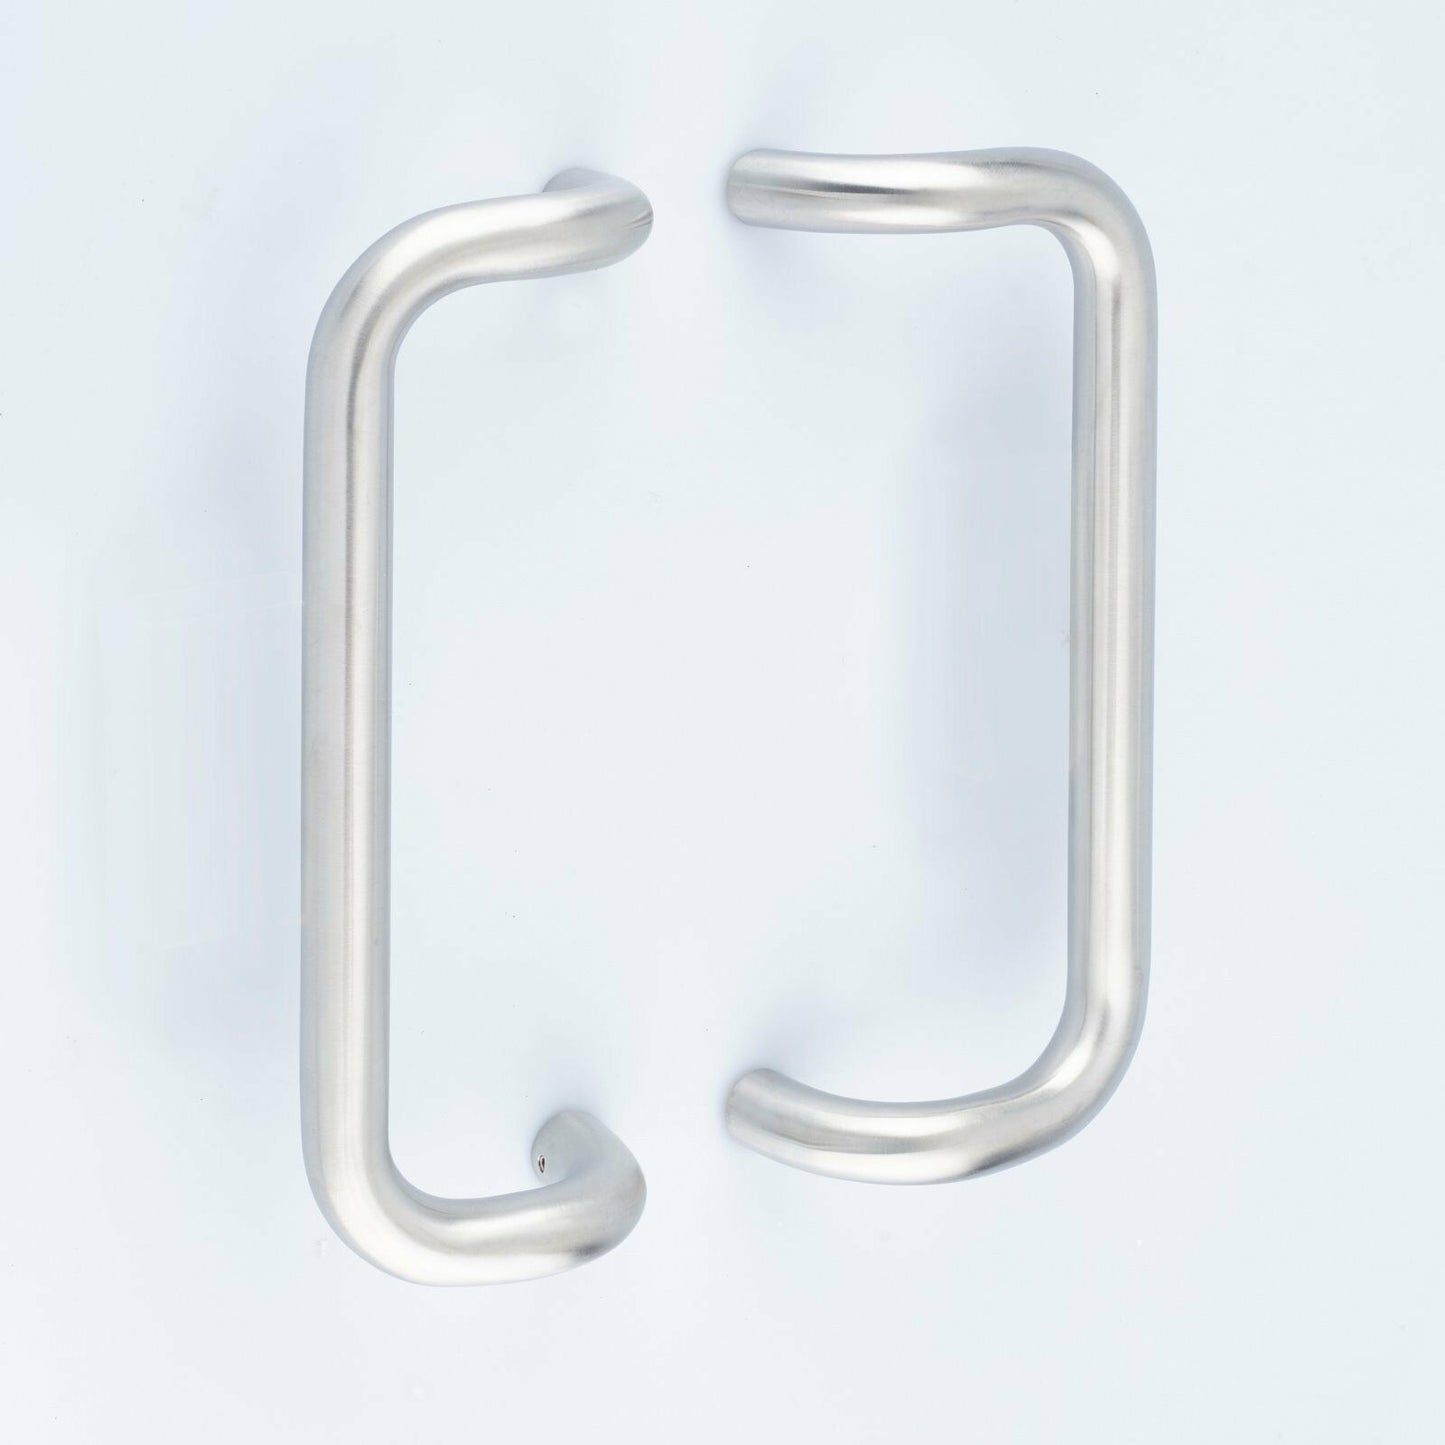 Satin Stainless Steel Cranked Back to Back Door Pull Handles (Pair) 600mm x 32mm